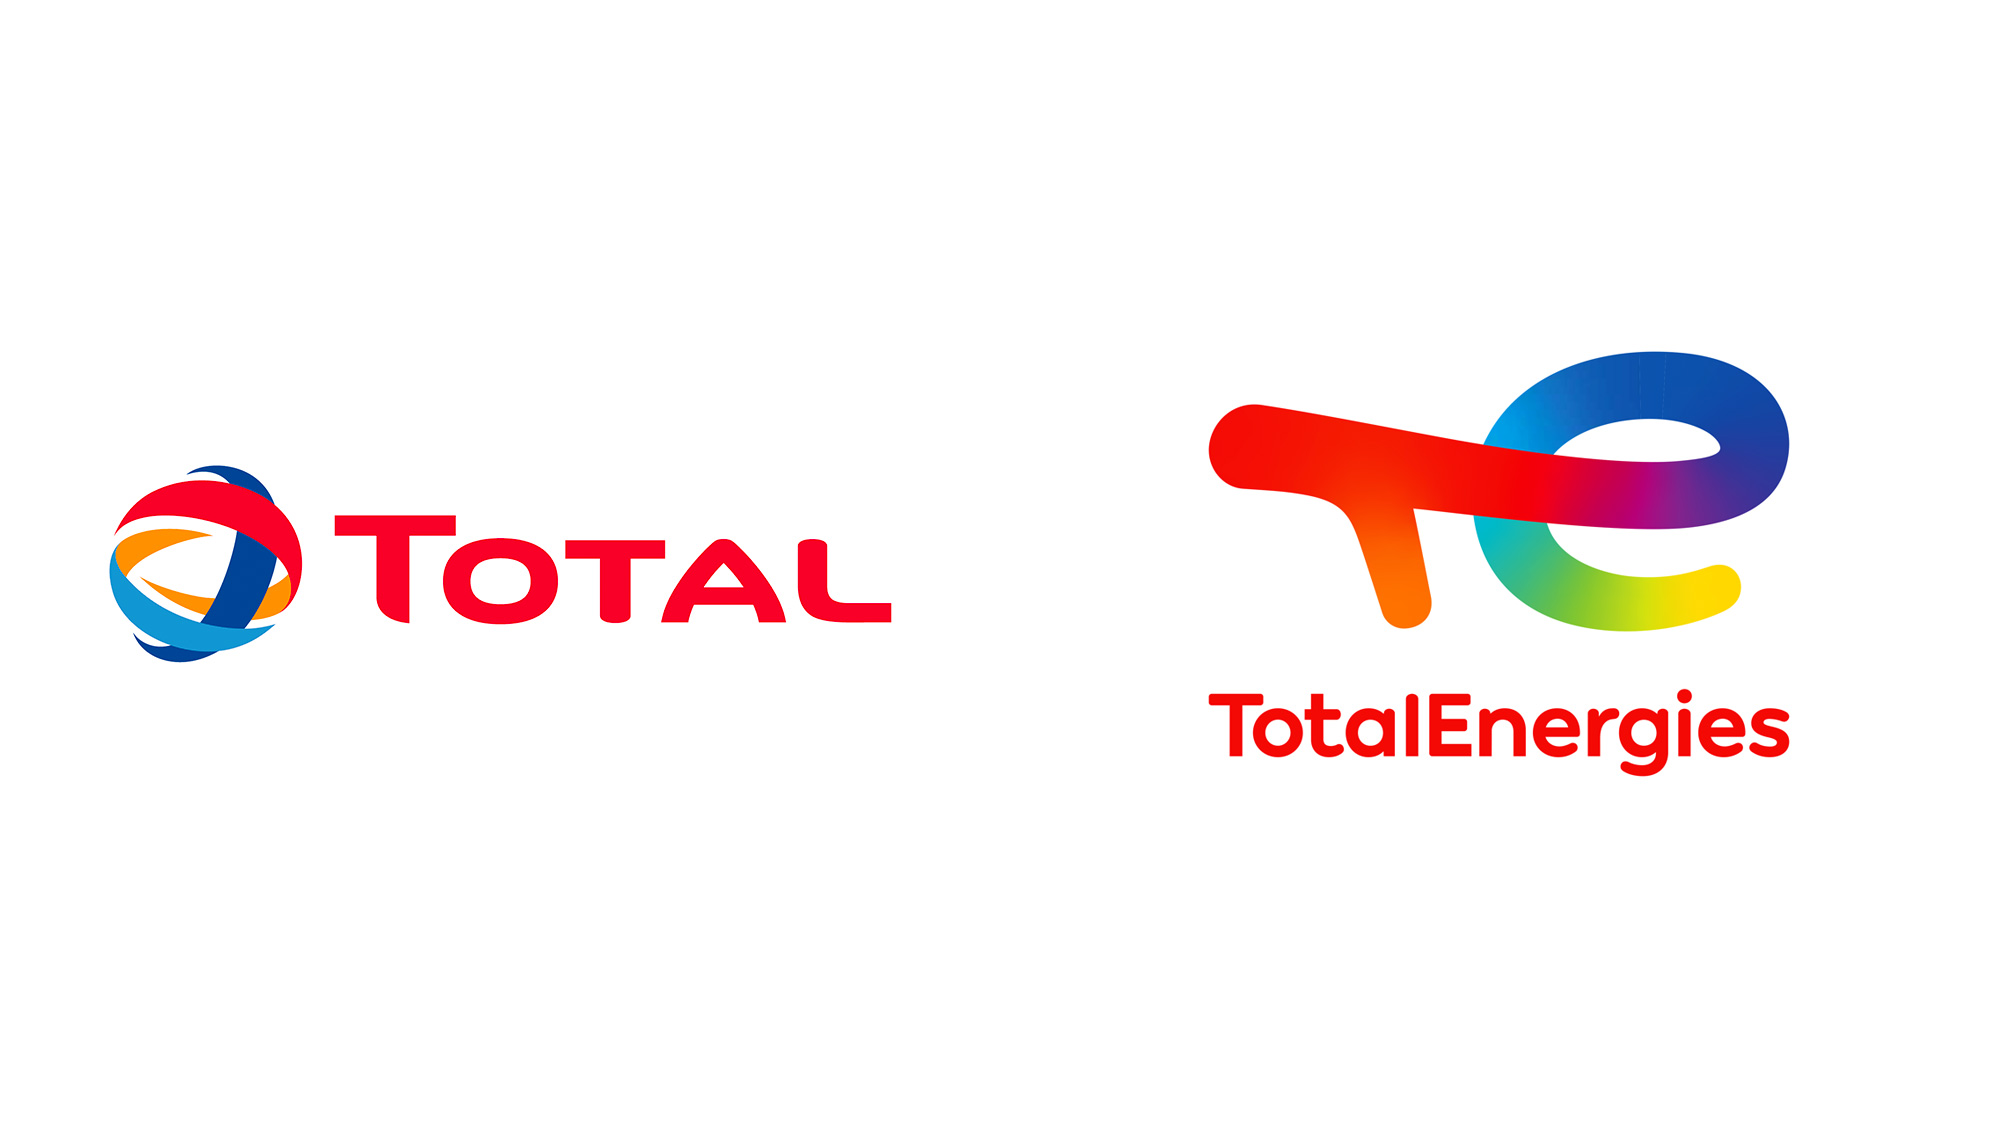 New Name and Logo for TotalEnergies